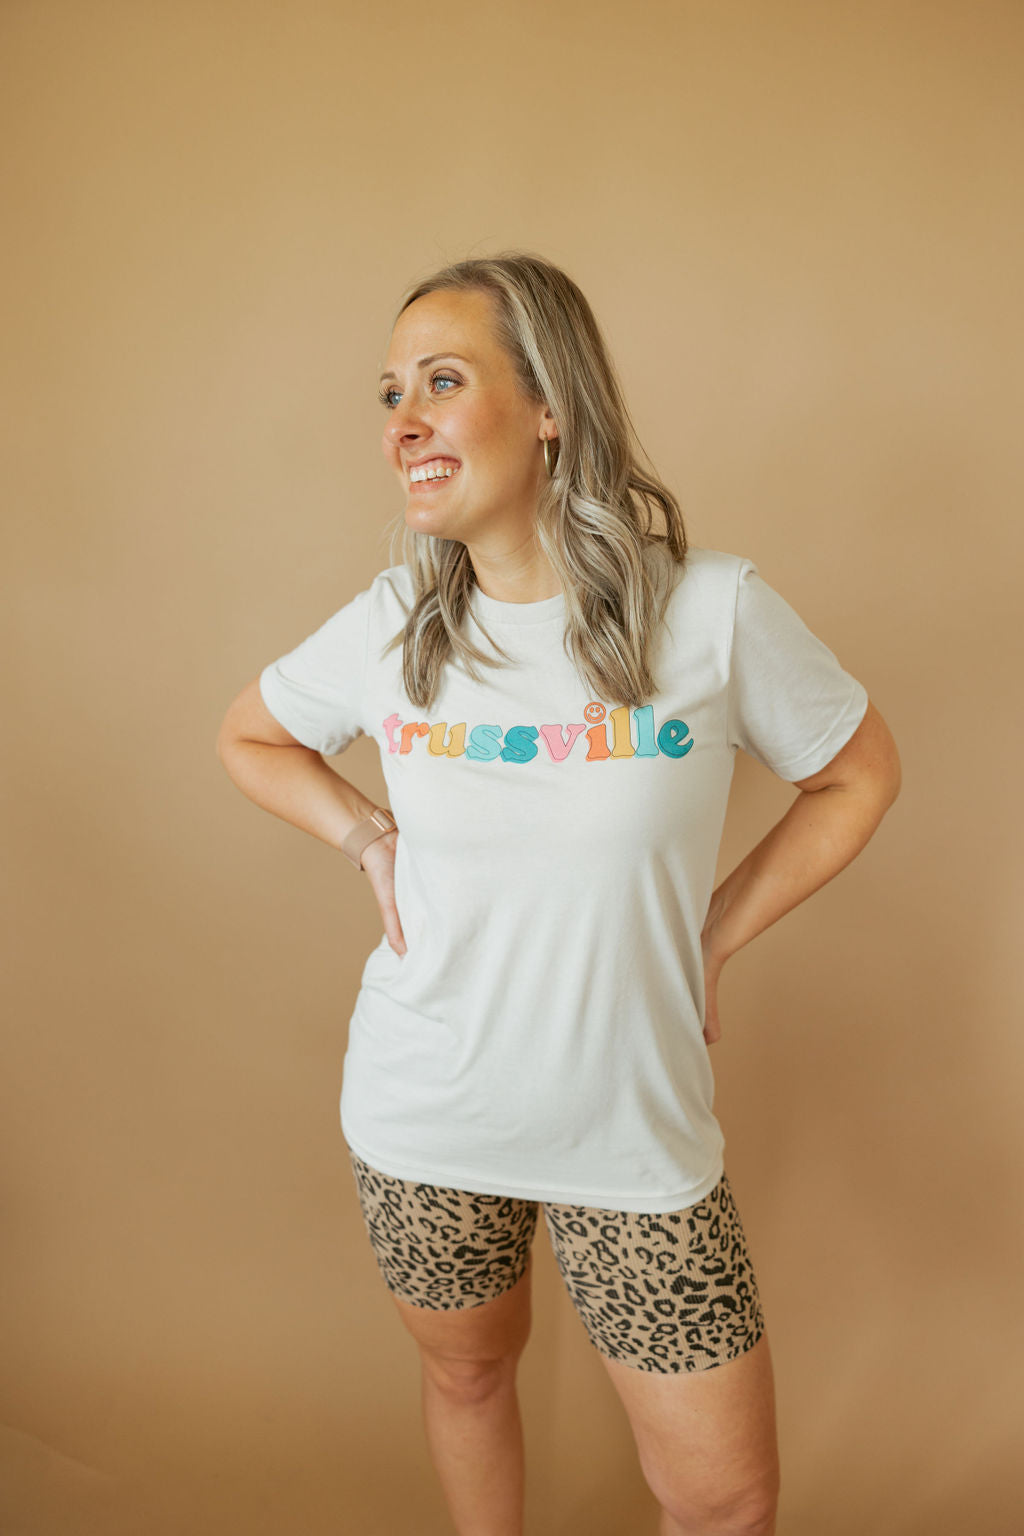 Customizable Multi Happy | Tee | Adult-Sister Shirts-Sister Shirts, Cute & Custom Tees for Mama & Littles in Trussville, Alabama.